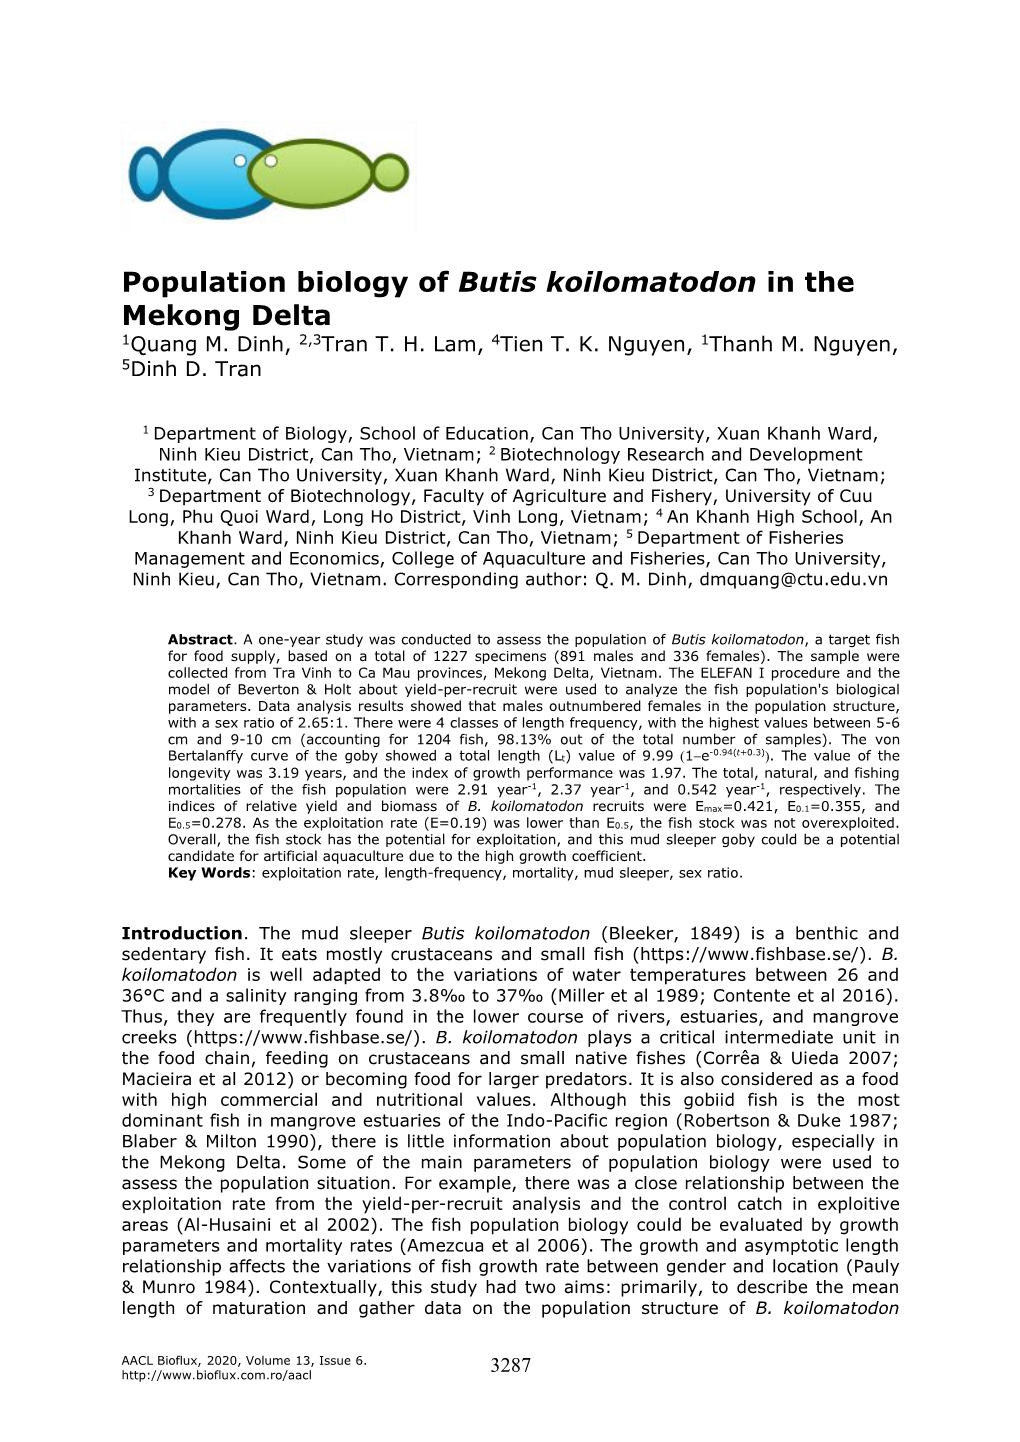 Population Biology of Butis Koilomatodon in the Mekong Delta 1Quang M